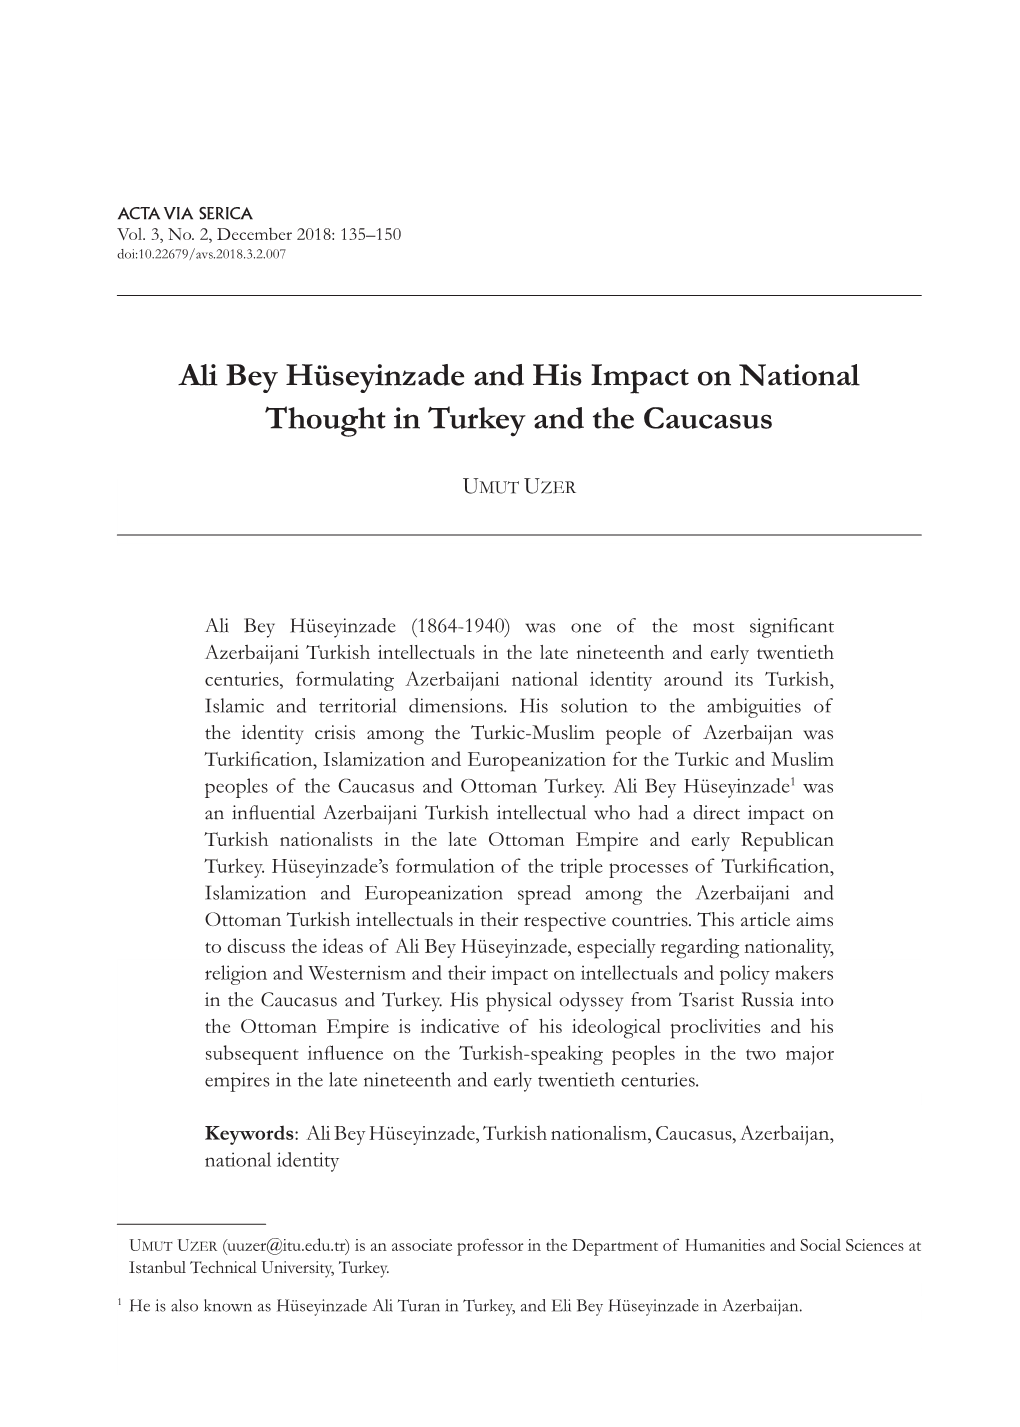 Ali Bey Hüseyinzade and His Impact on National Thought in Turkey and the Caucasus